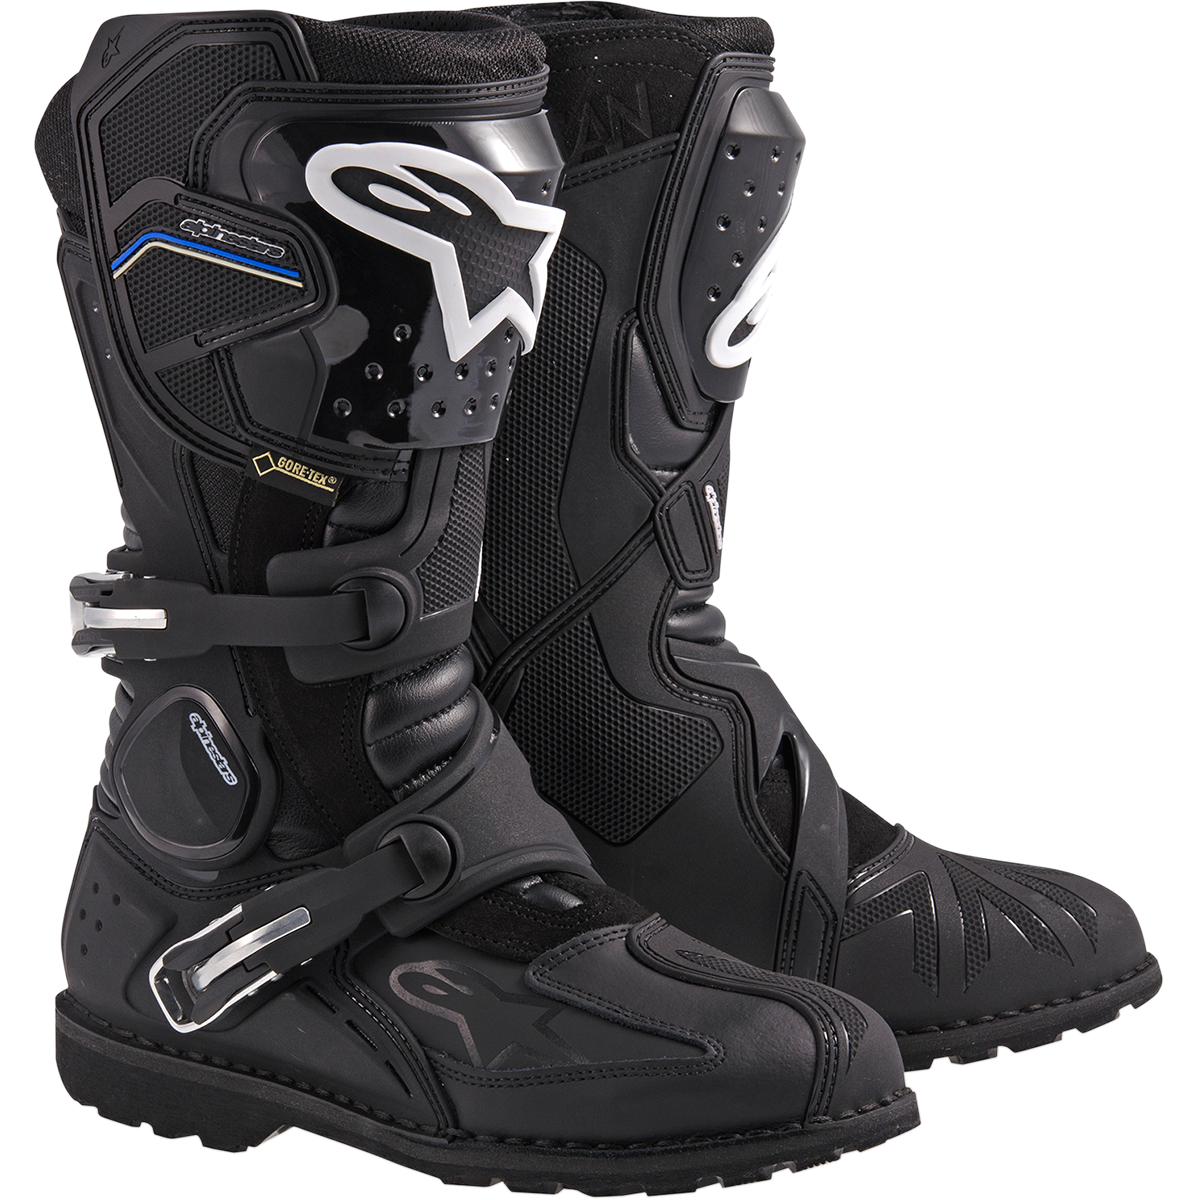 Road Adventure Touring Boots